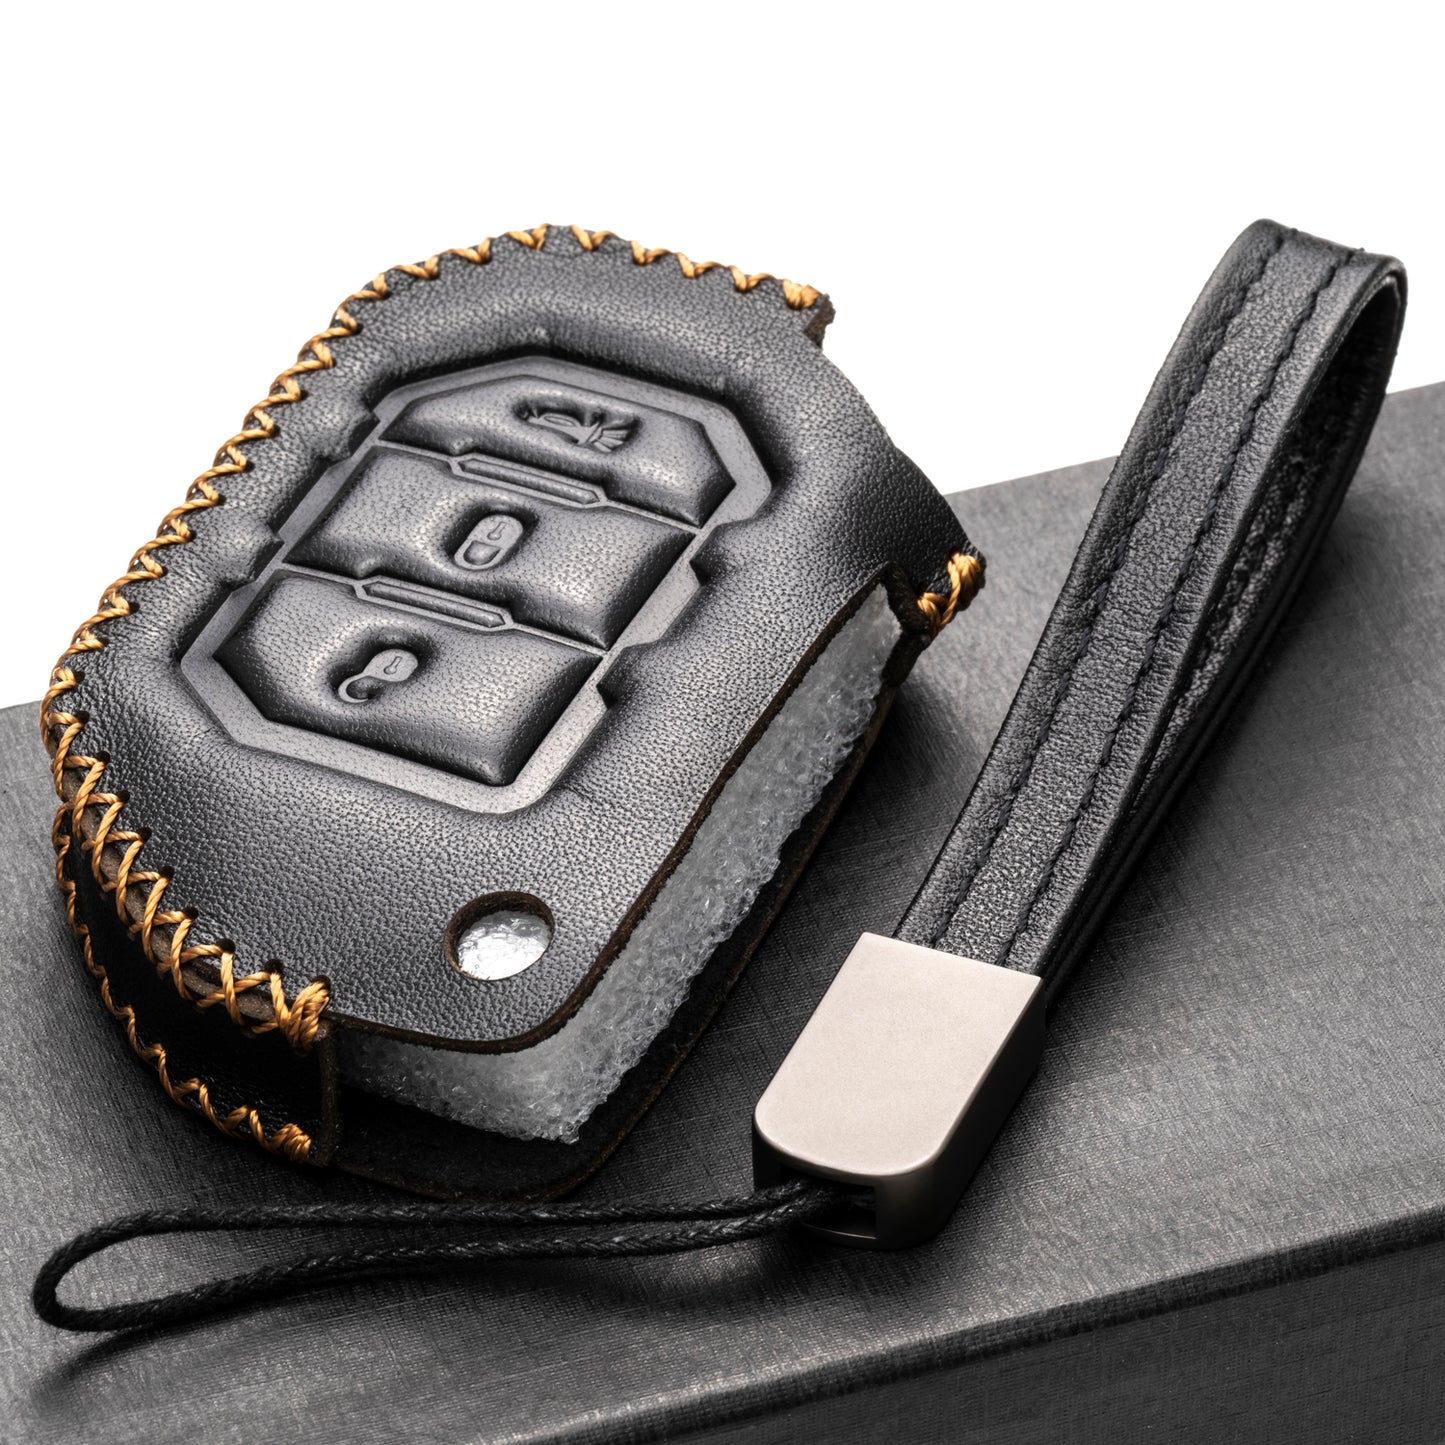 Vitodeco 3-Button Genuine Leather Flip Key Fob Case Cover Protector with Leather Key Strap Compatible for 2018-2024 Jeep Wrangler